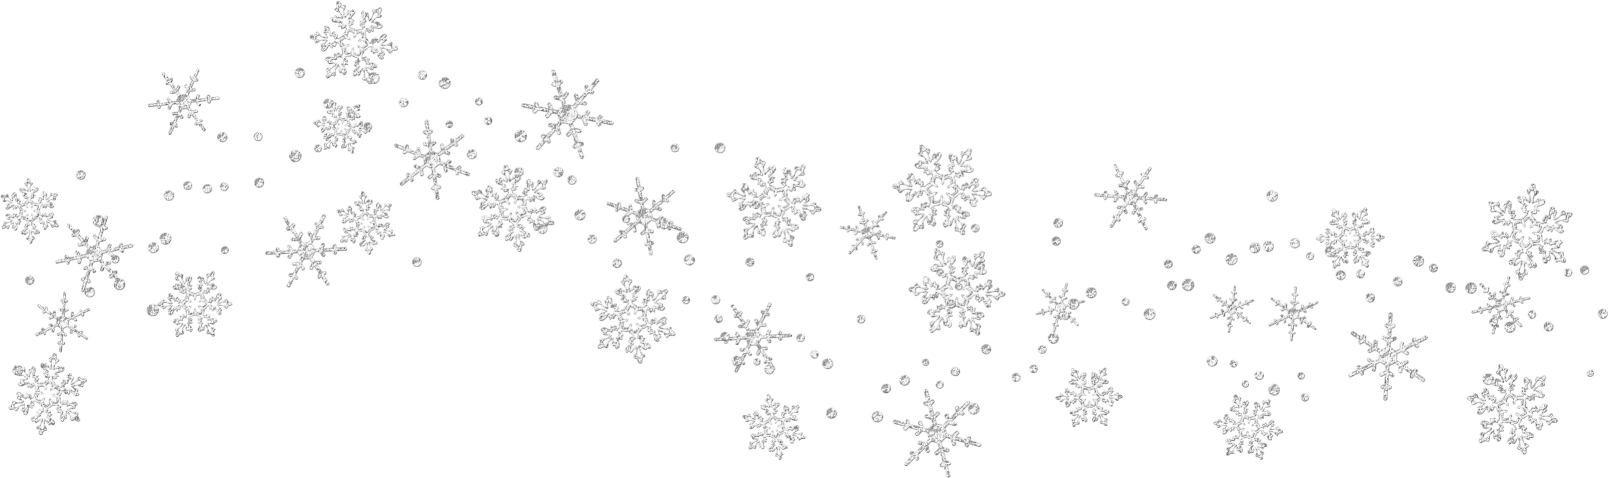  collection of free. Snowflakes border png